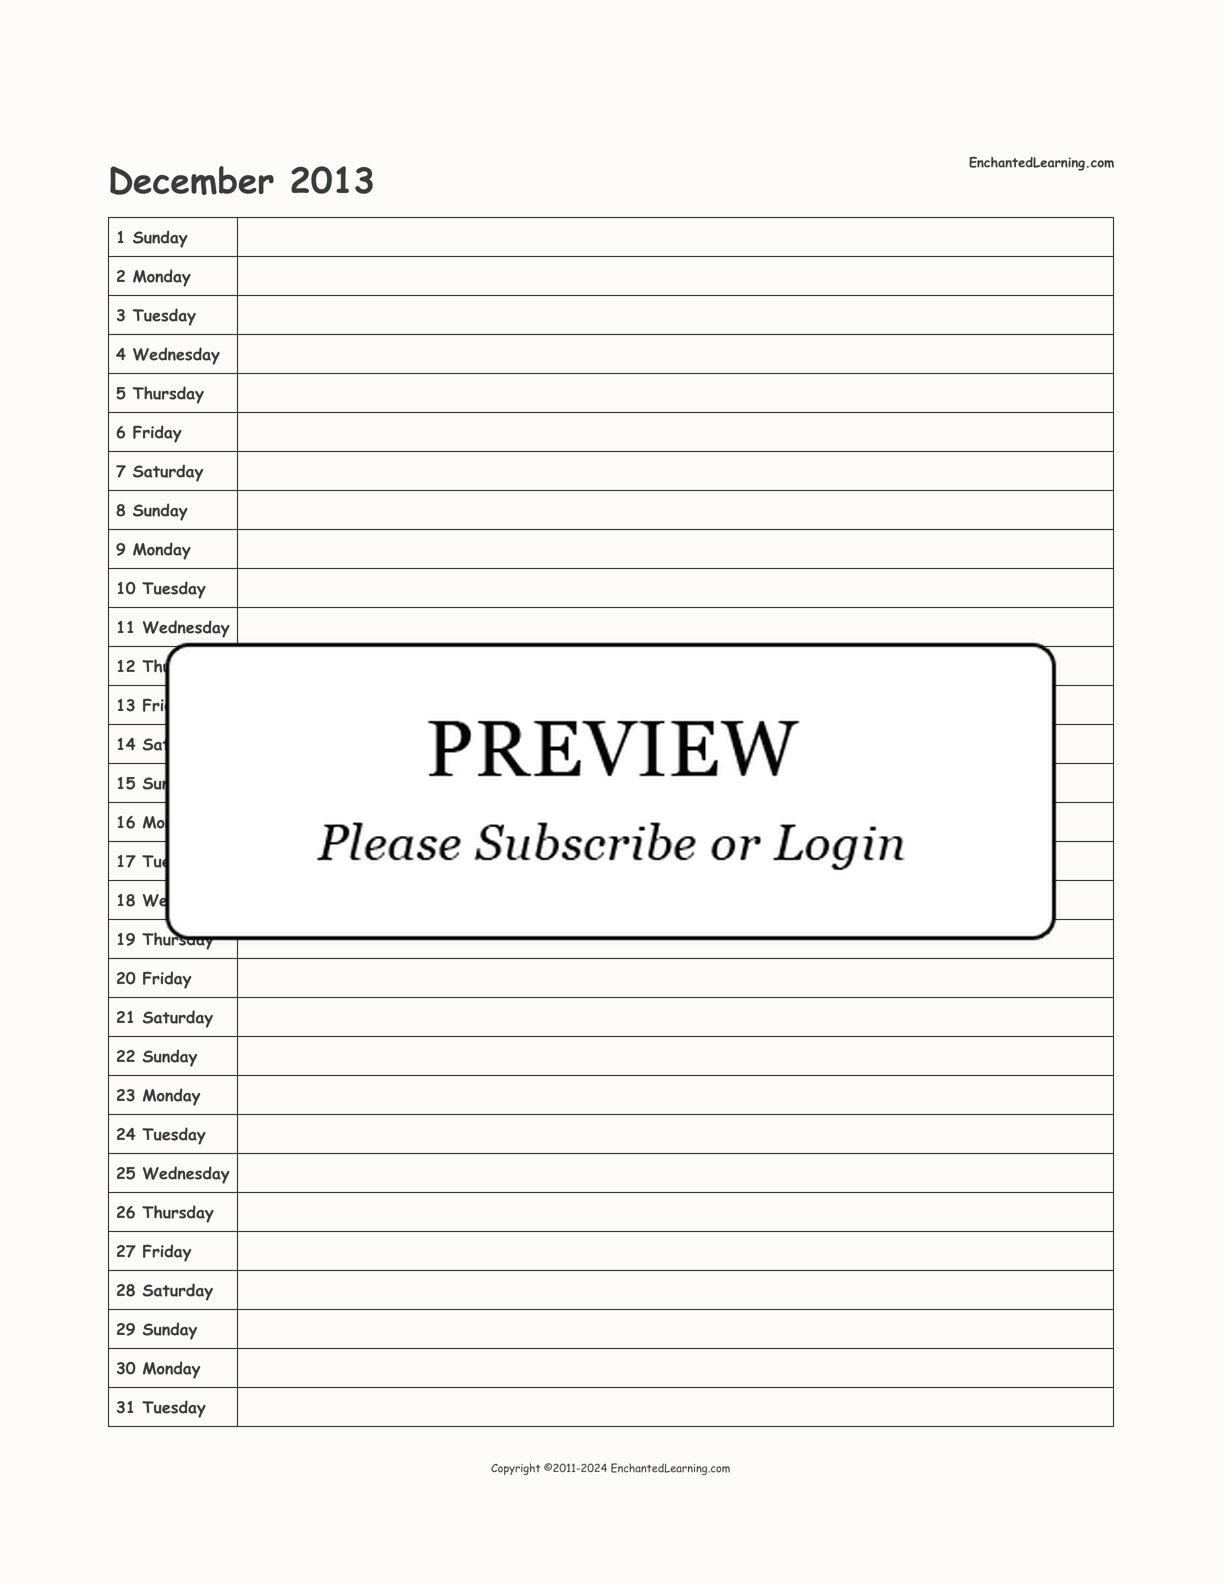 2013 Scheduling Calendar interactive printout page 12